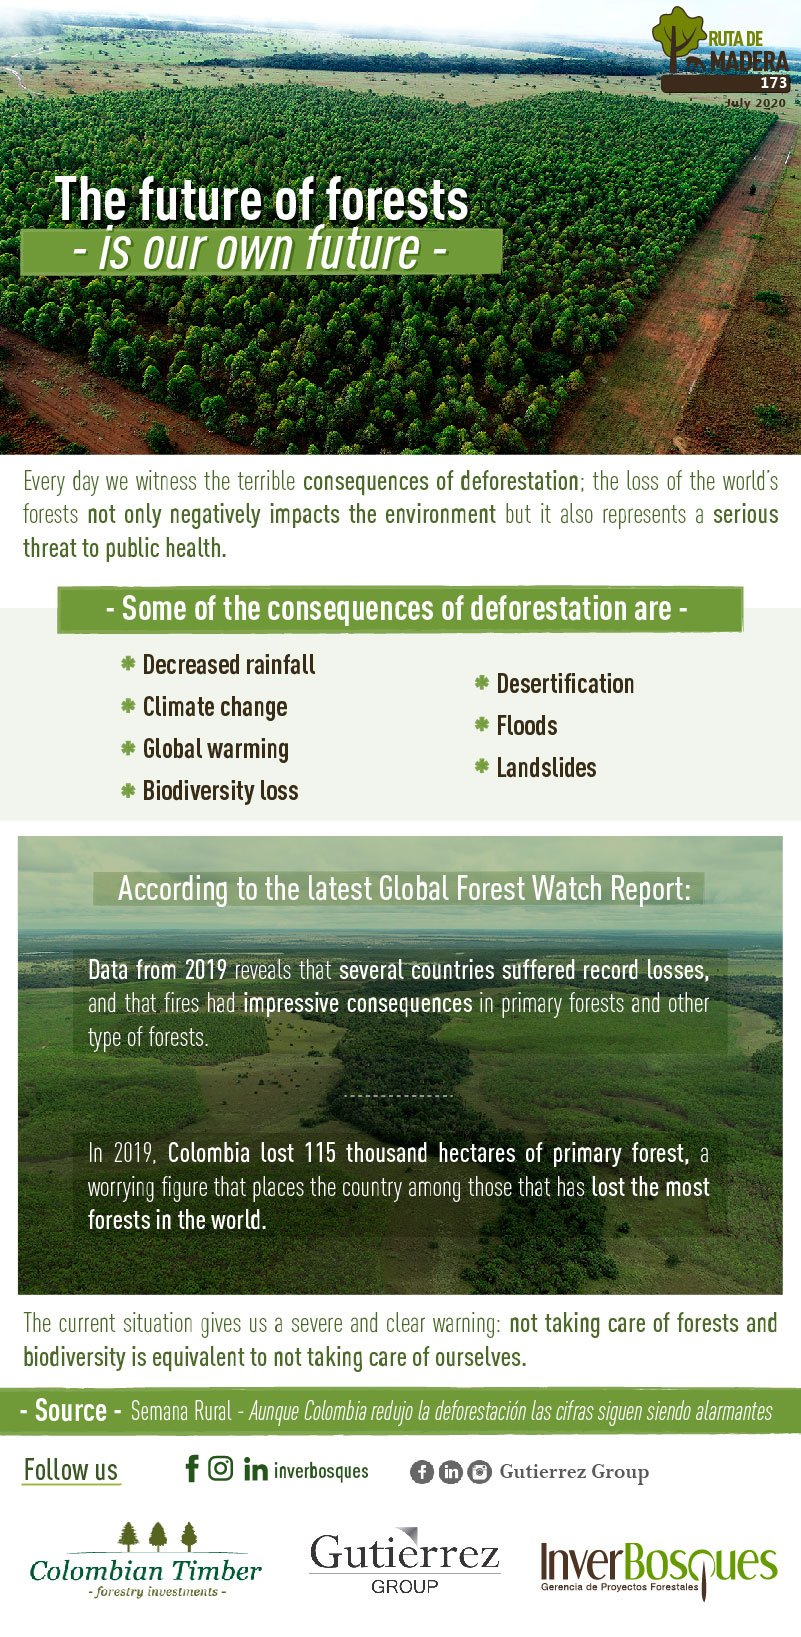 The future of forests is our own future